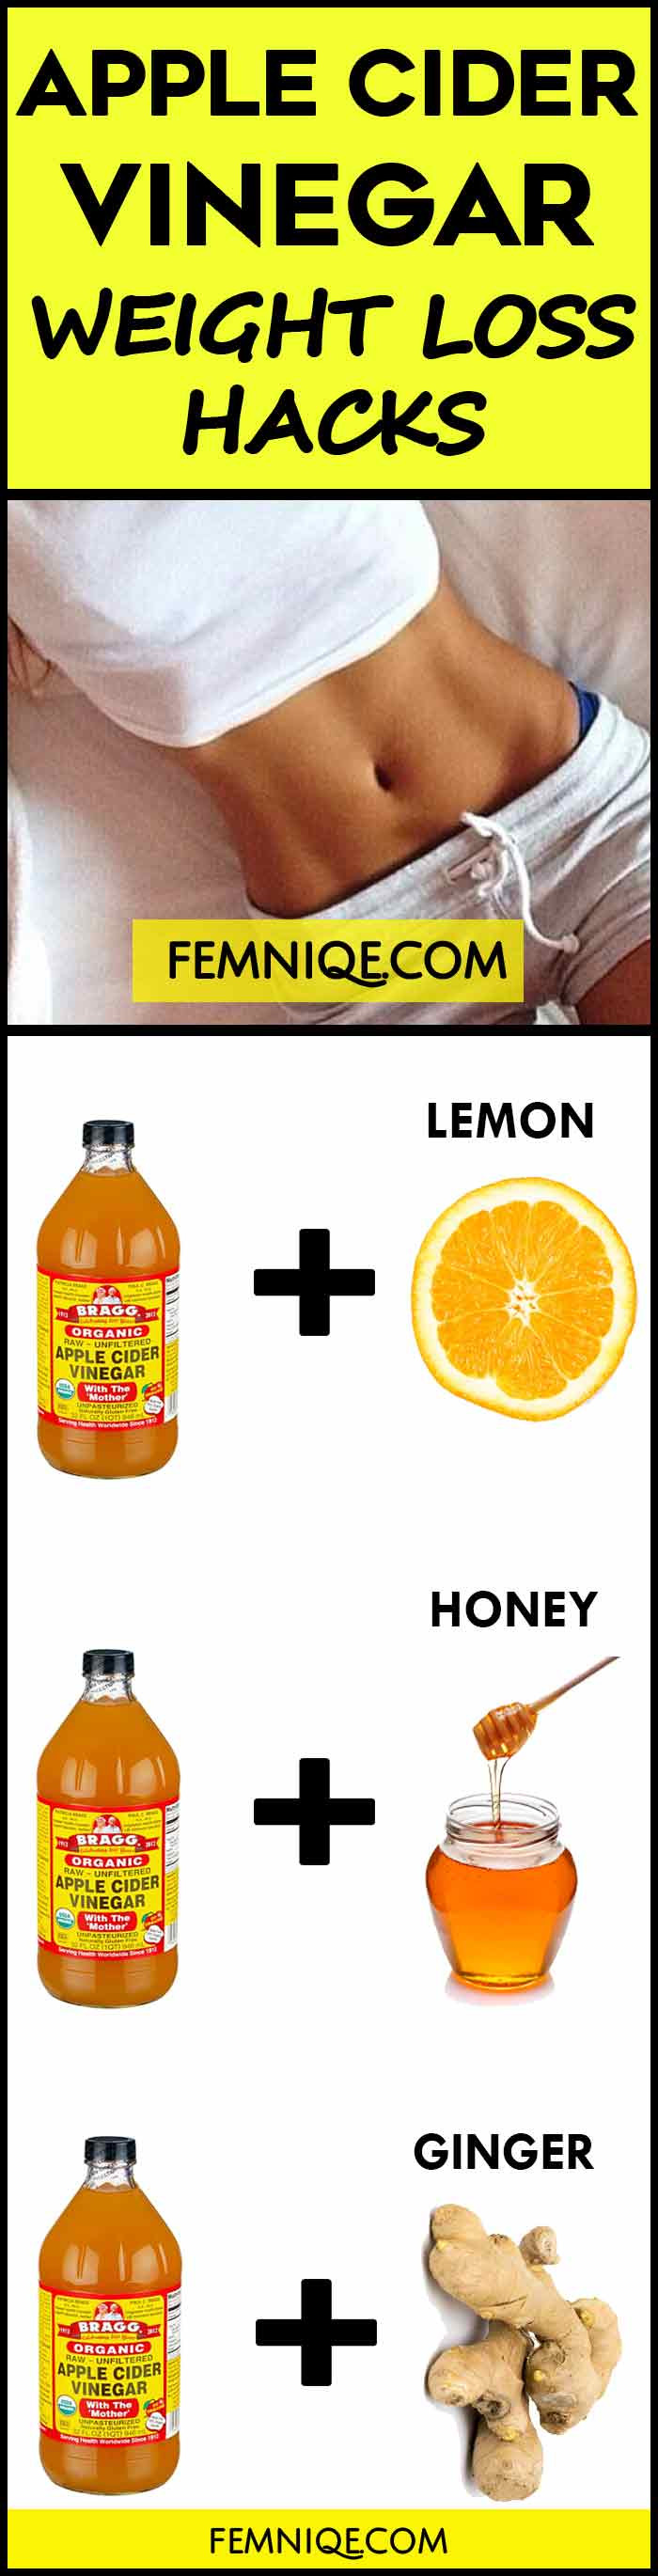 Apple Cider Vinegar Weight Loss Drink
 How To Use Apple Cider Vinegar for Weight Loss Femniqe